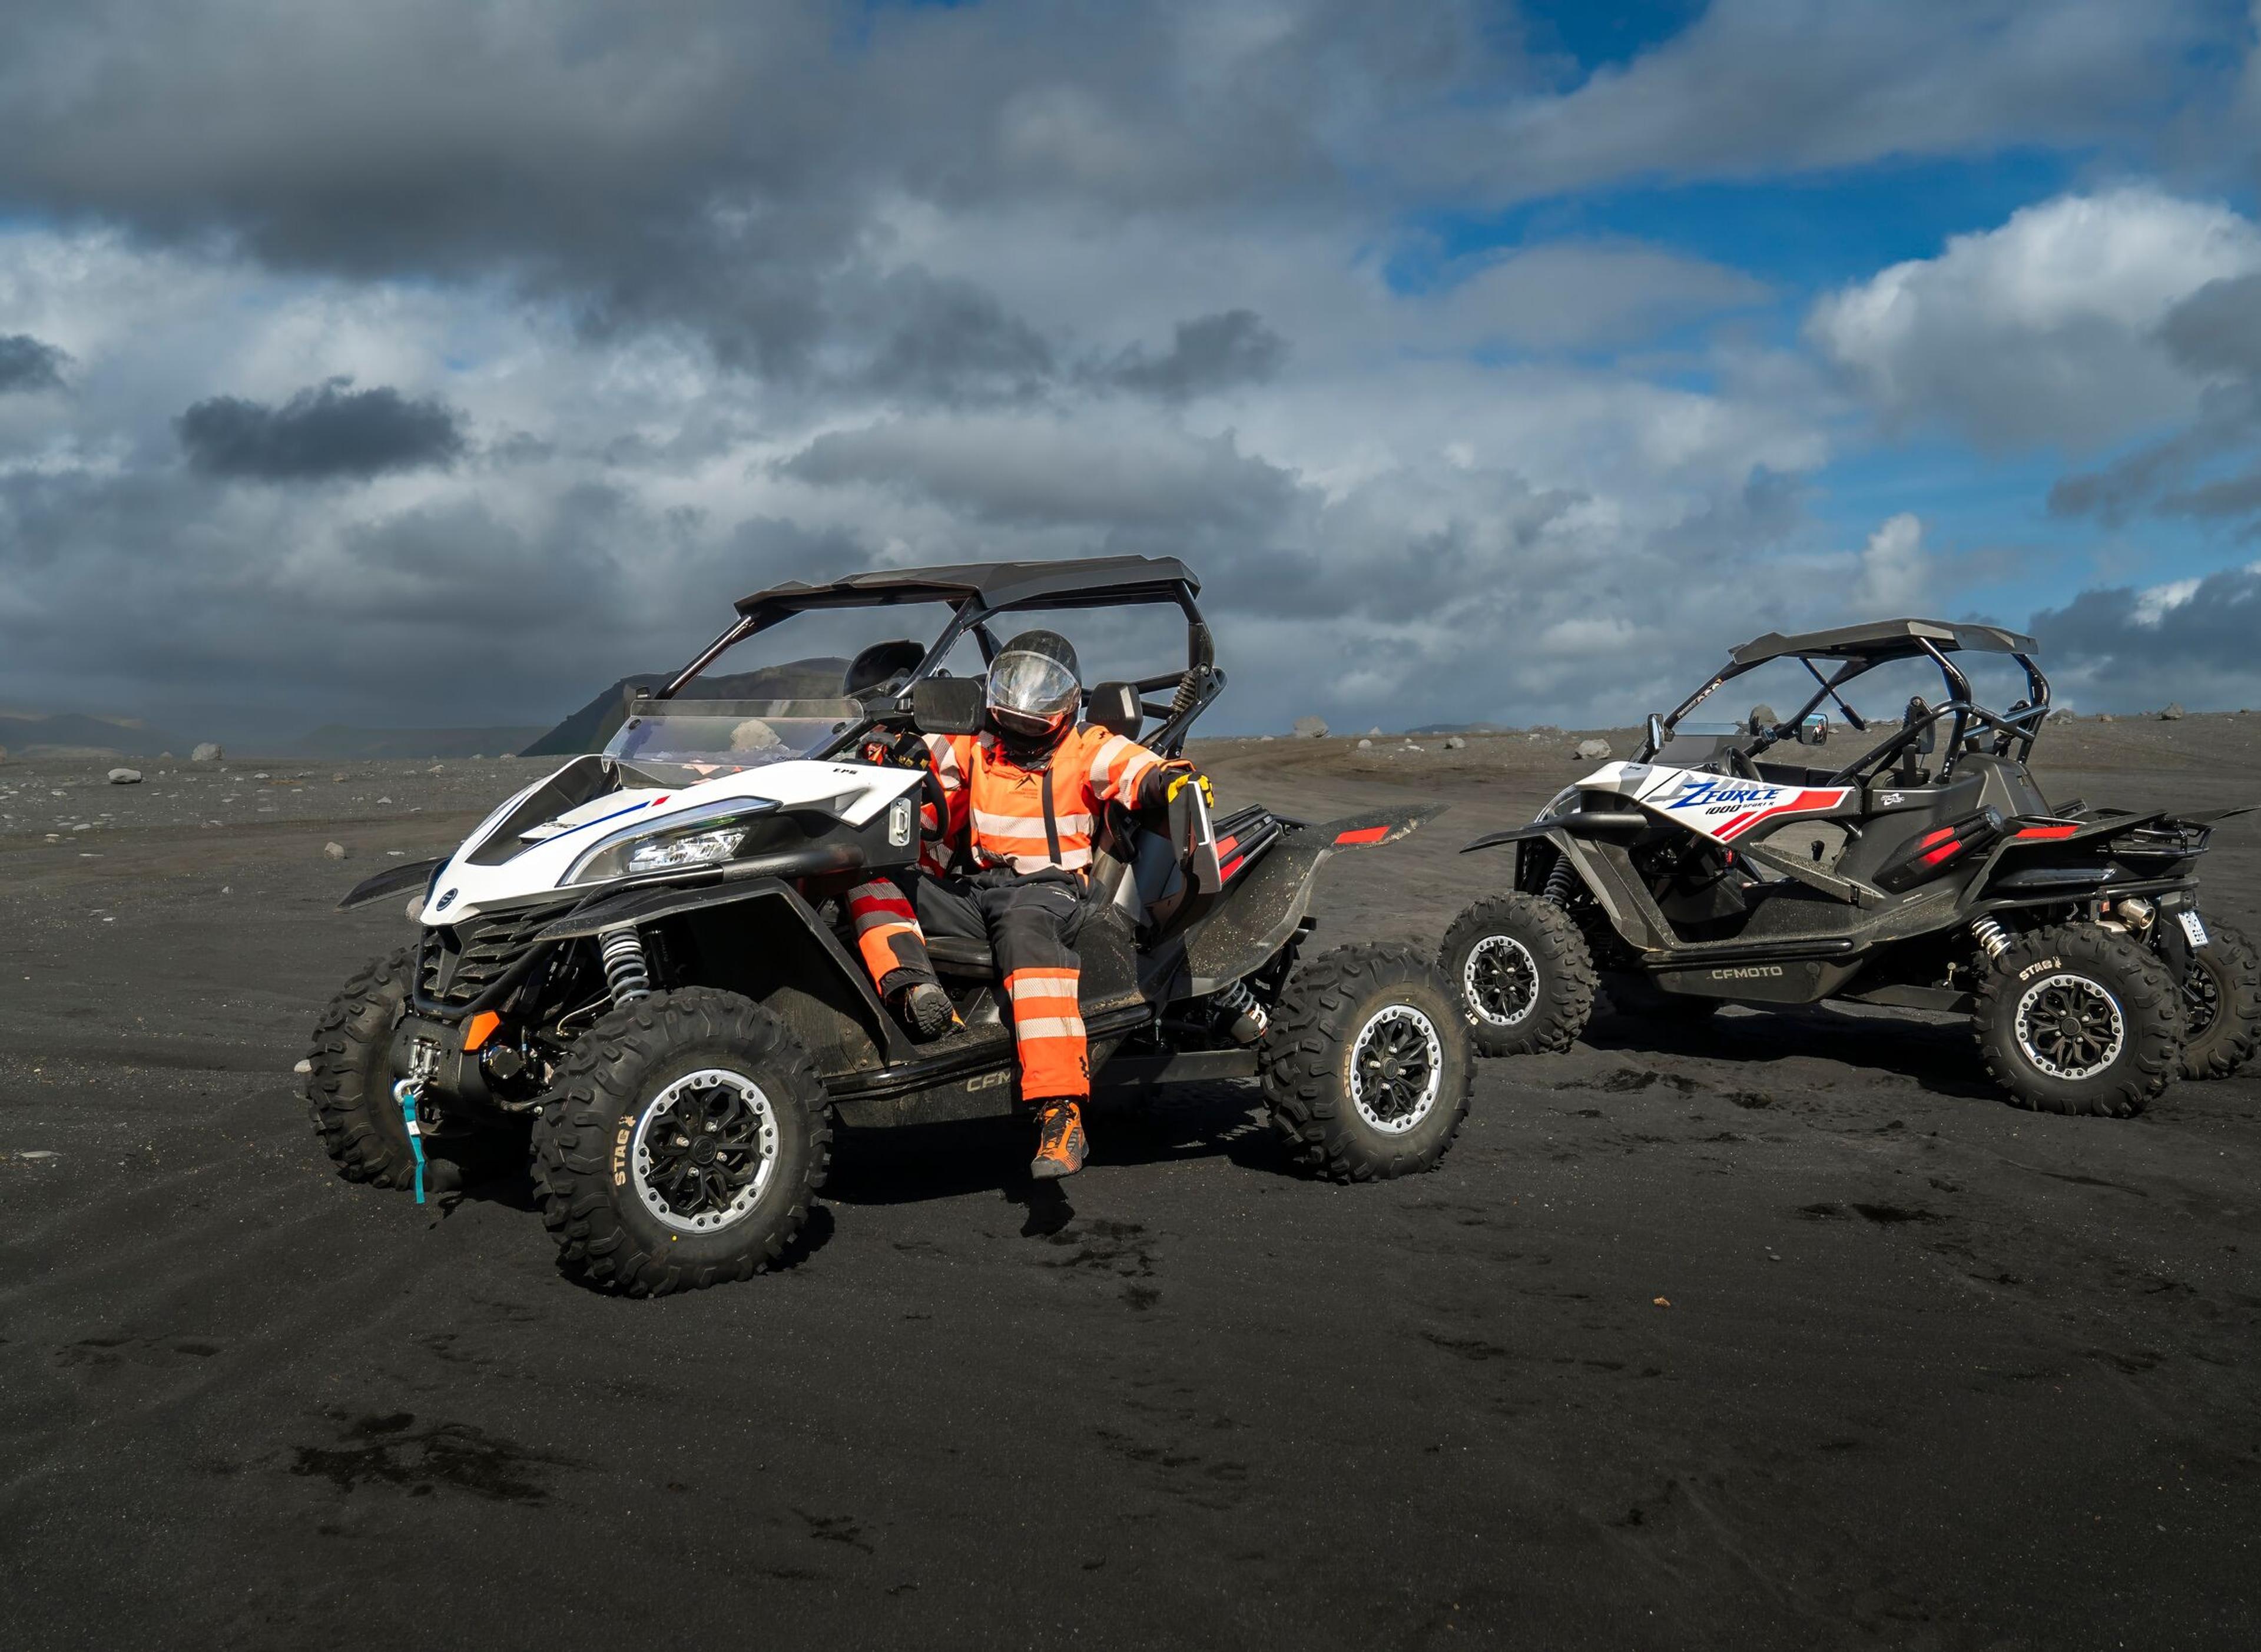 Person in orange gear sitting on an off-road vehicle with another similar vehicle nearby on a black sand landscape in Iceland.